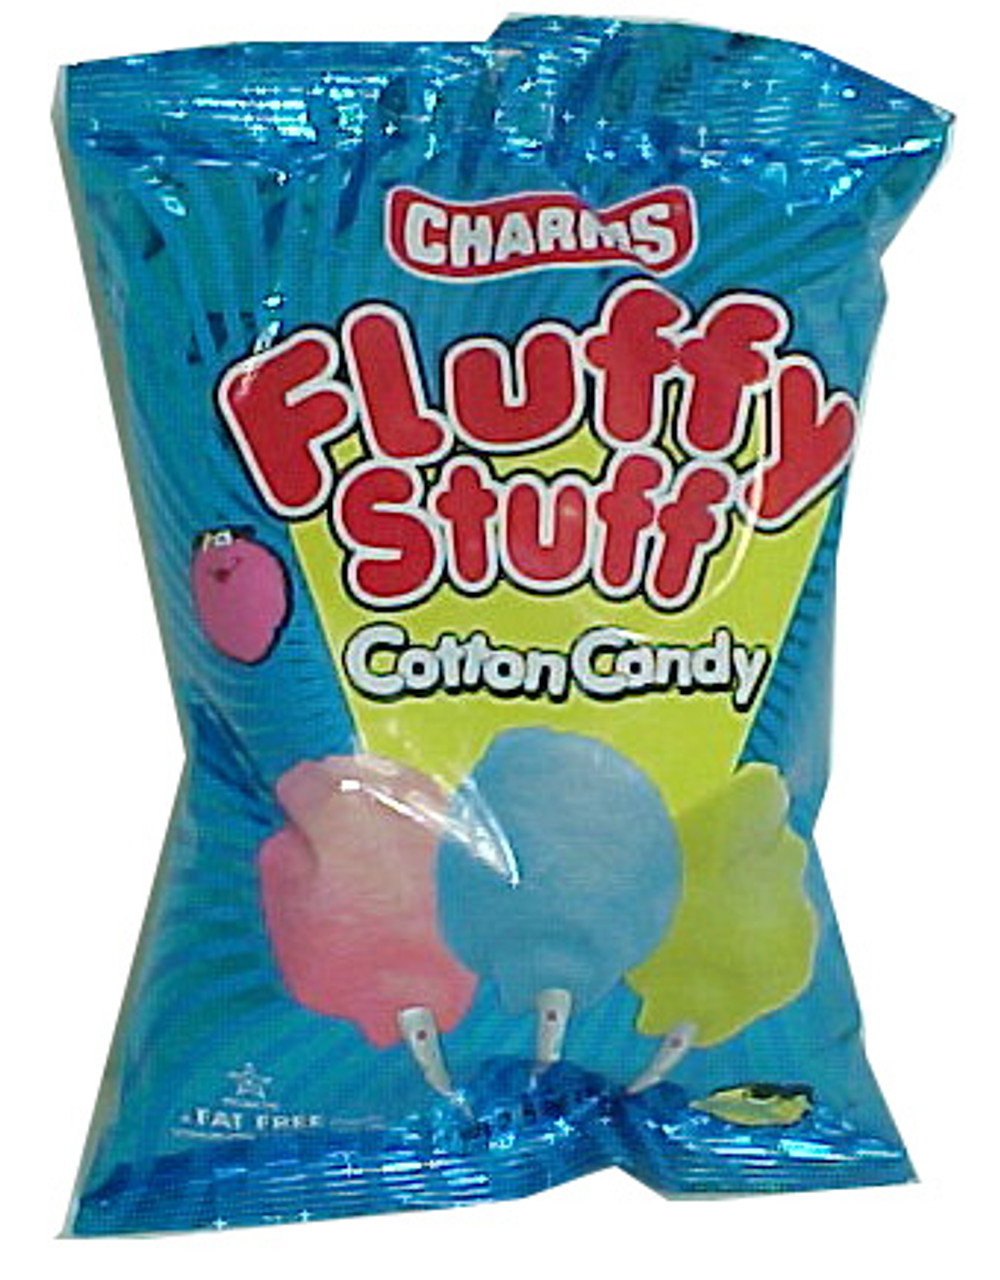 Fluffy Stuff Cotton Candy Bag: 24 Count - 2.5 oz